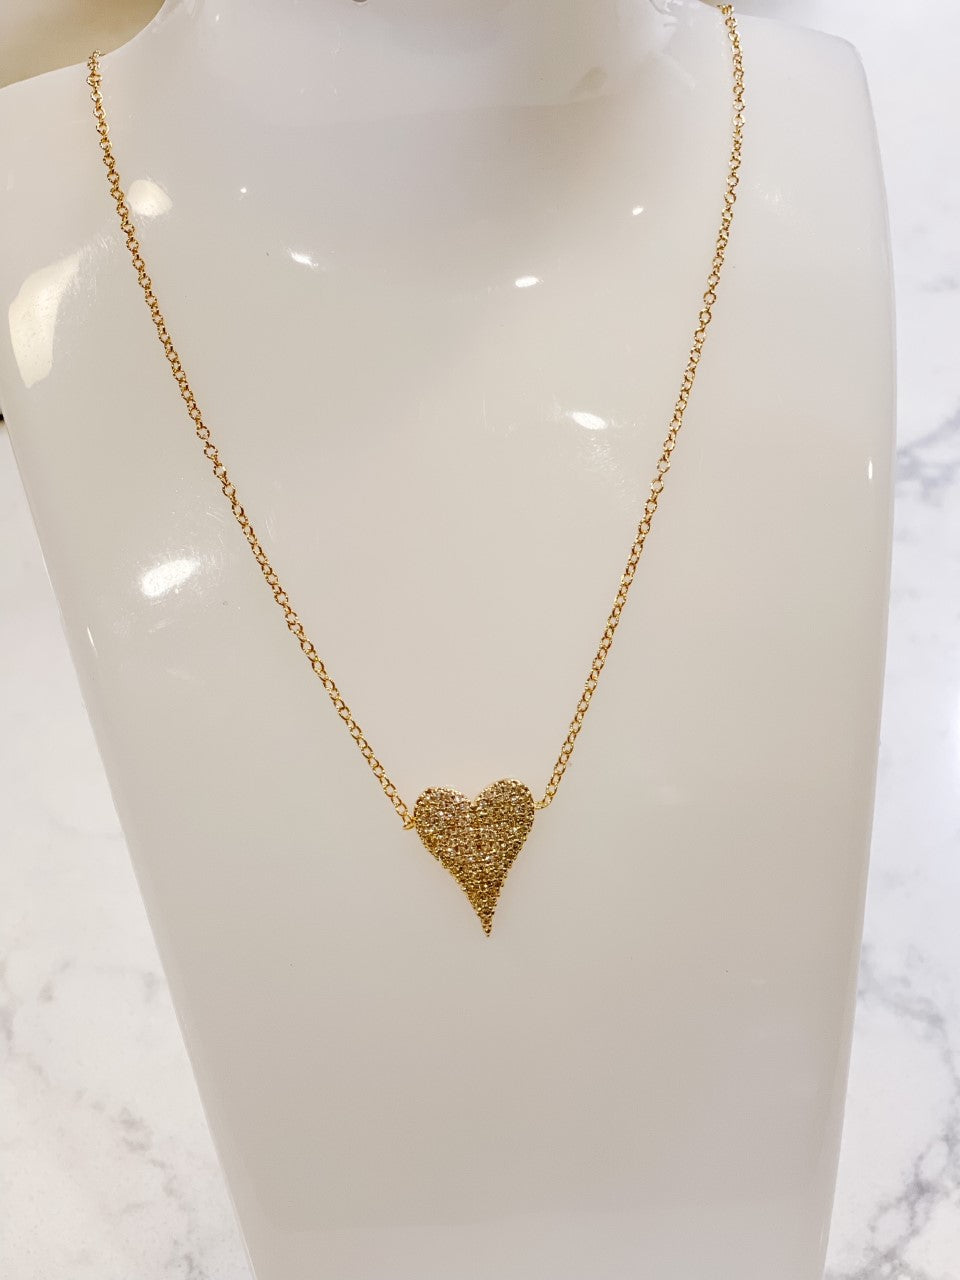 The Heart of Gold - necklace